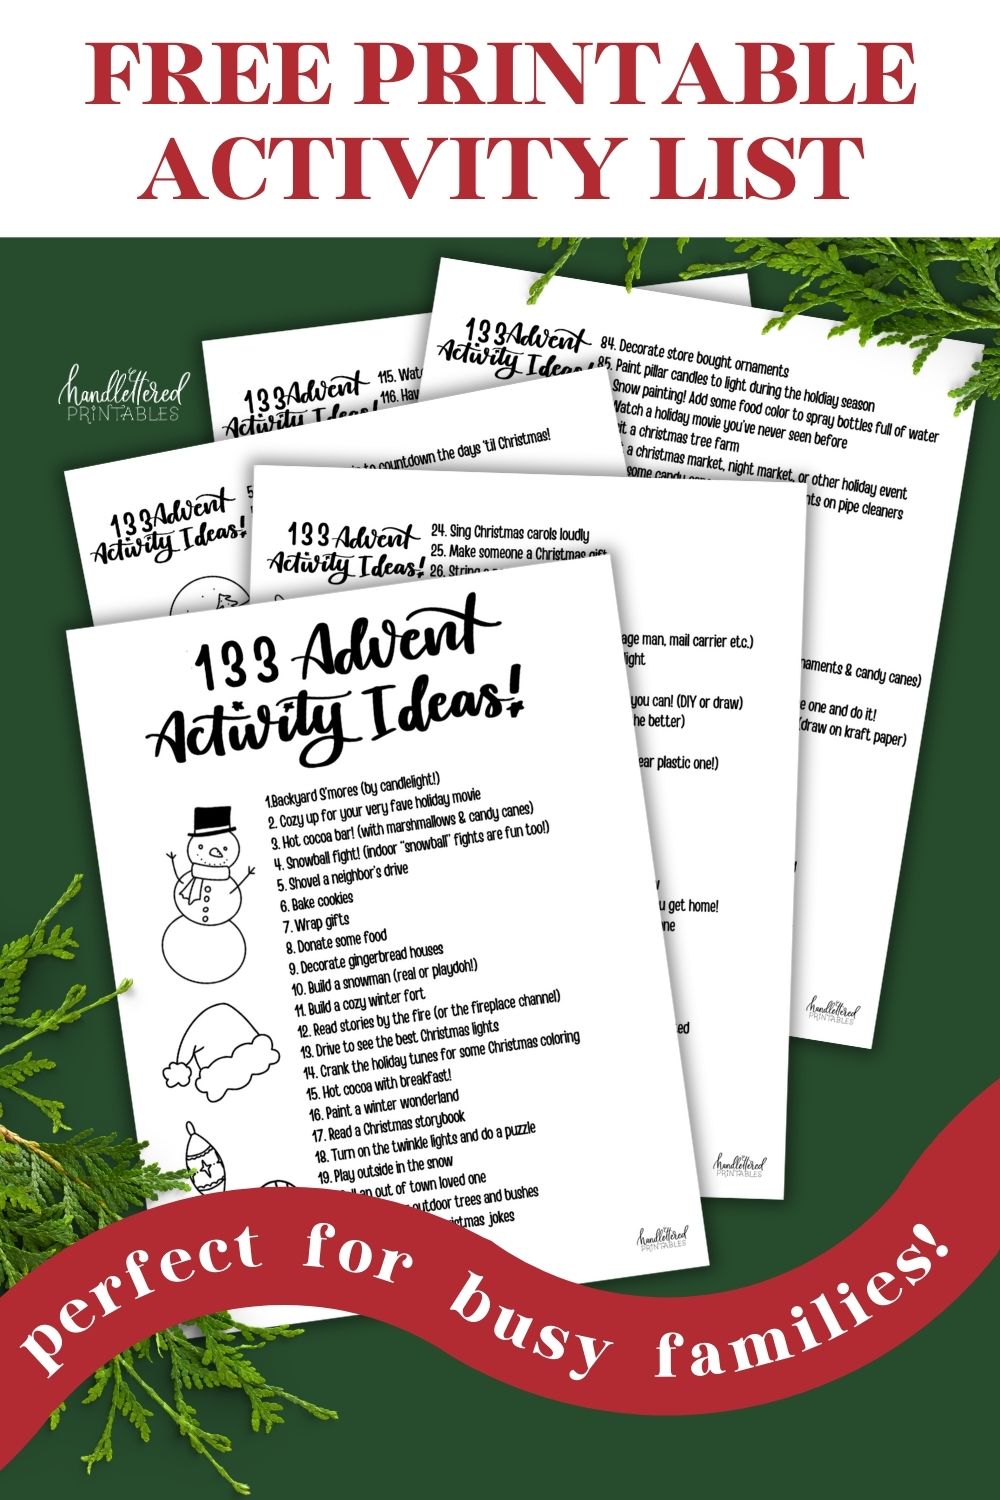 Free printable activity list for advent calendars, image of printables printed on green background